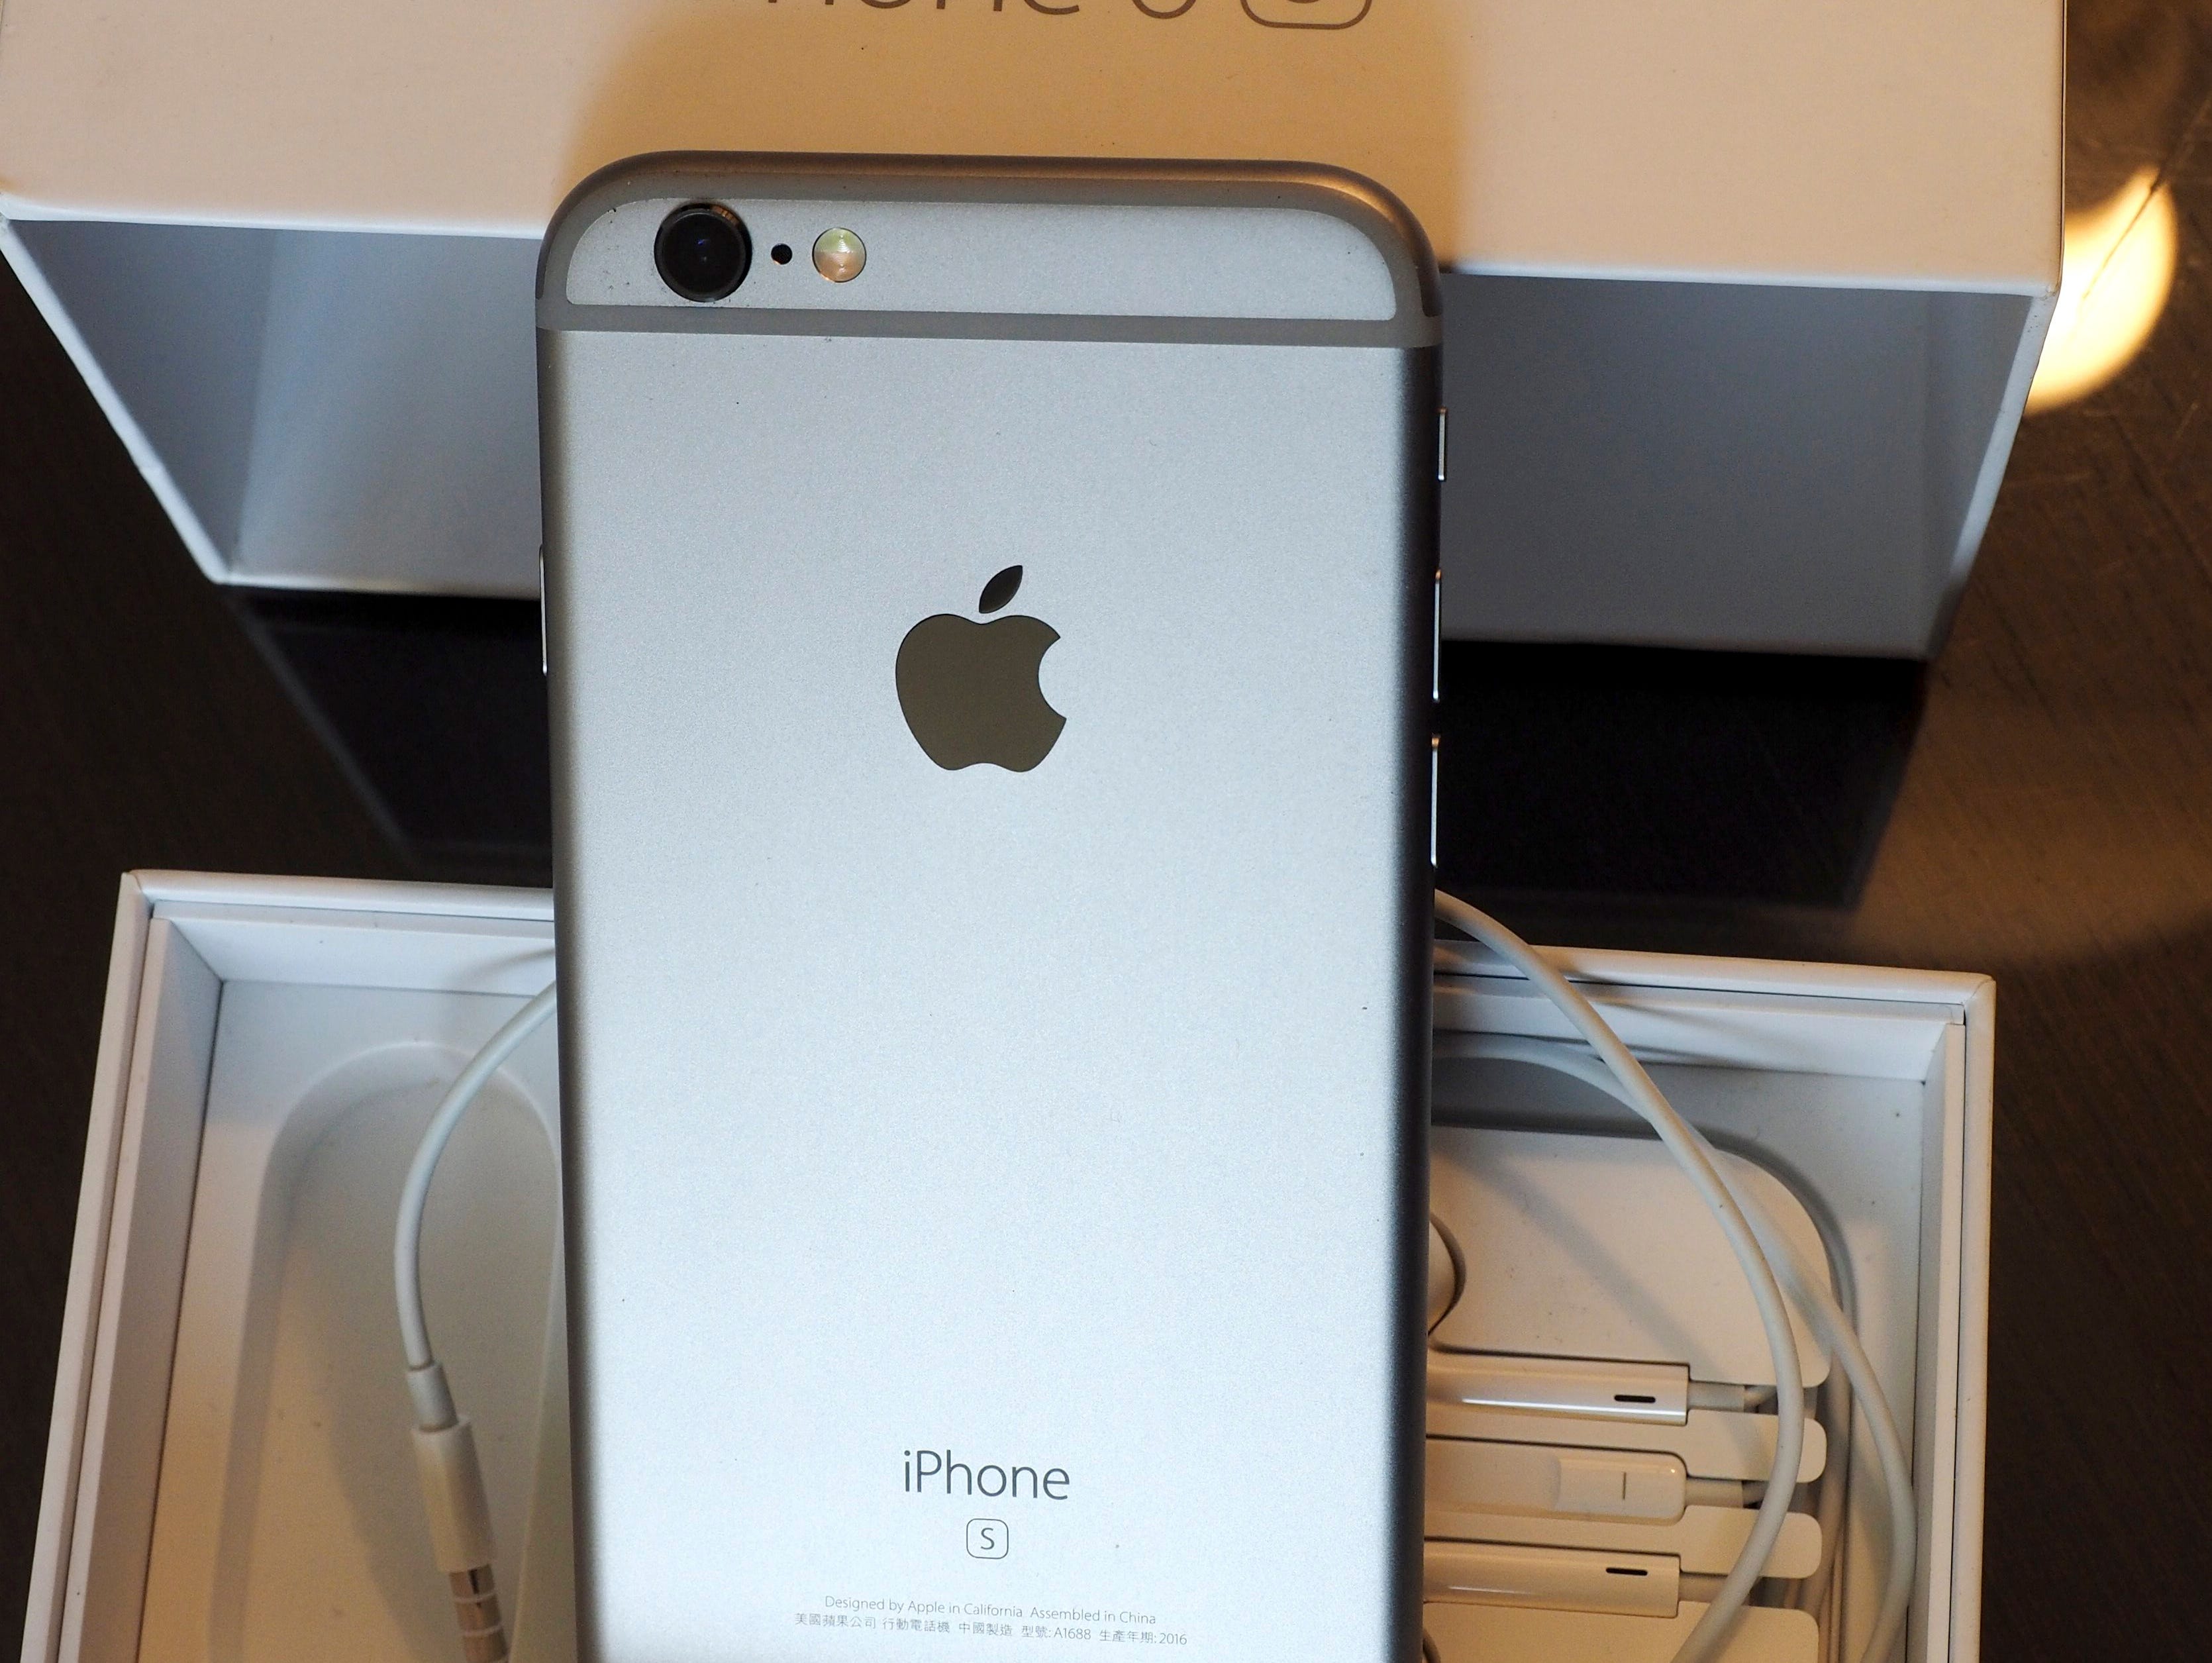 File photo shows a closeup view of an iPhone 6s smartphone.